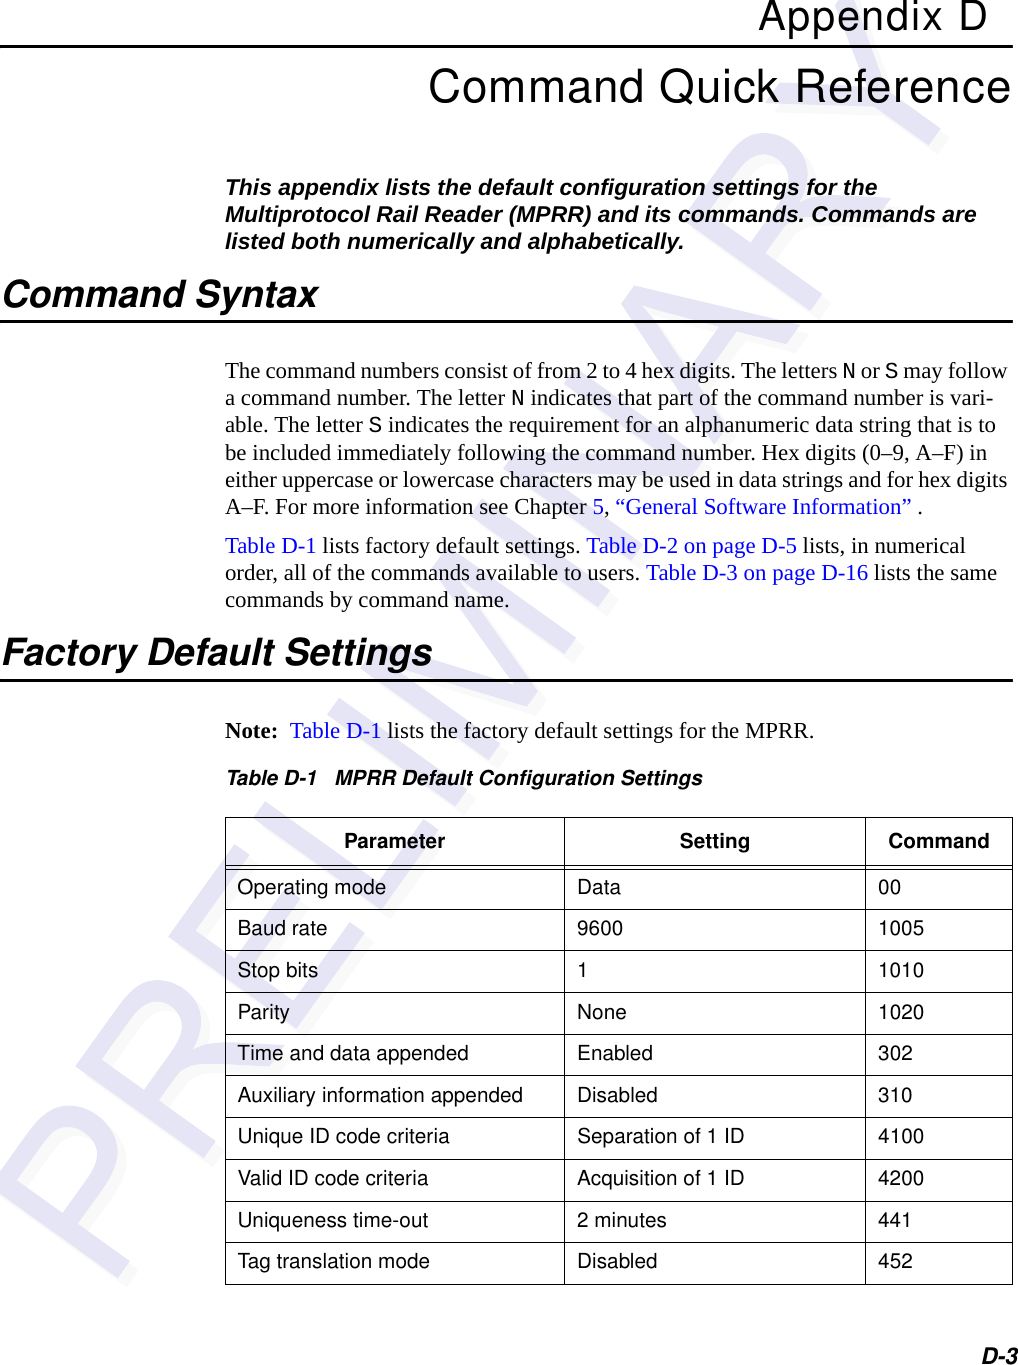 D-3Appendix DCommand Quick ReferenceThis appendix lists the default configuration settings for the Multiprotocol Rail Reader (MPRR) and its commands. Commands are listed both numerically and alphabetically.Command SyntaxThe command numbers consist of from 2 to 4 hex digits. The letters N or S may follow a command number. The letter N indicates that part of the command number is vari-able. The letter S indicates the requirement for an alphanumeric data string that is to be included immediately following the command number. Hex digits (0–9, A–F) in either uppercase or lowercase characters may be used in data strings and for hex digits A–F. For more information see Chapter 5, “General Software Information” .Table D-1 lists factory default settings. Table D-2 on page D-5 lists, in numerical order, all of the commands available to users. Table D-3 on page D-16 lists the same commands by command name.Factory Default SettingsNote:  Table D-1 lists the factory default settings for the MPRR.Table D-1   MPRR Default Configuration SettingsParameter Setting CommandOperating mode Data 00Baud rate 9600 1005Stop bits 1 1010Parity None 1020Time and data appended Enabled 302Auxiliary information appended Disabled 310Unique ID code criteria Separation of 1 ID 4100Valid ID code criteria Acquisition of 1 ID 4200Uniqueness time-out 2 minutes 441Tag translation mode Disabled 452